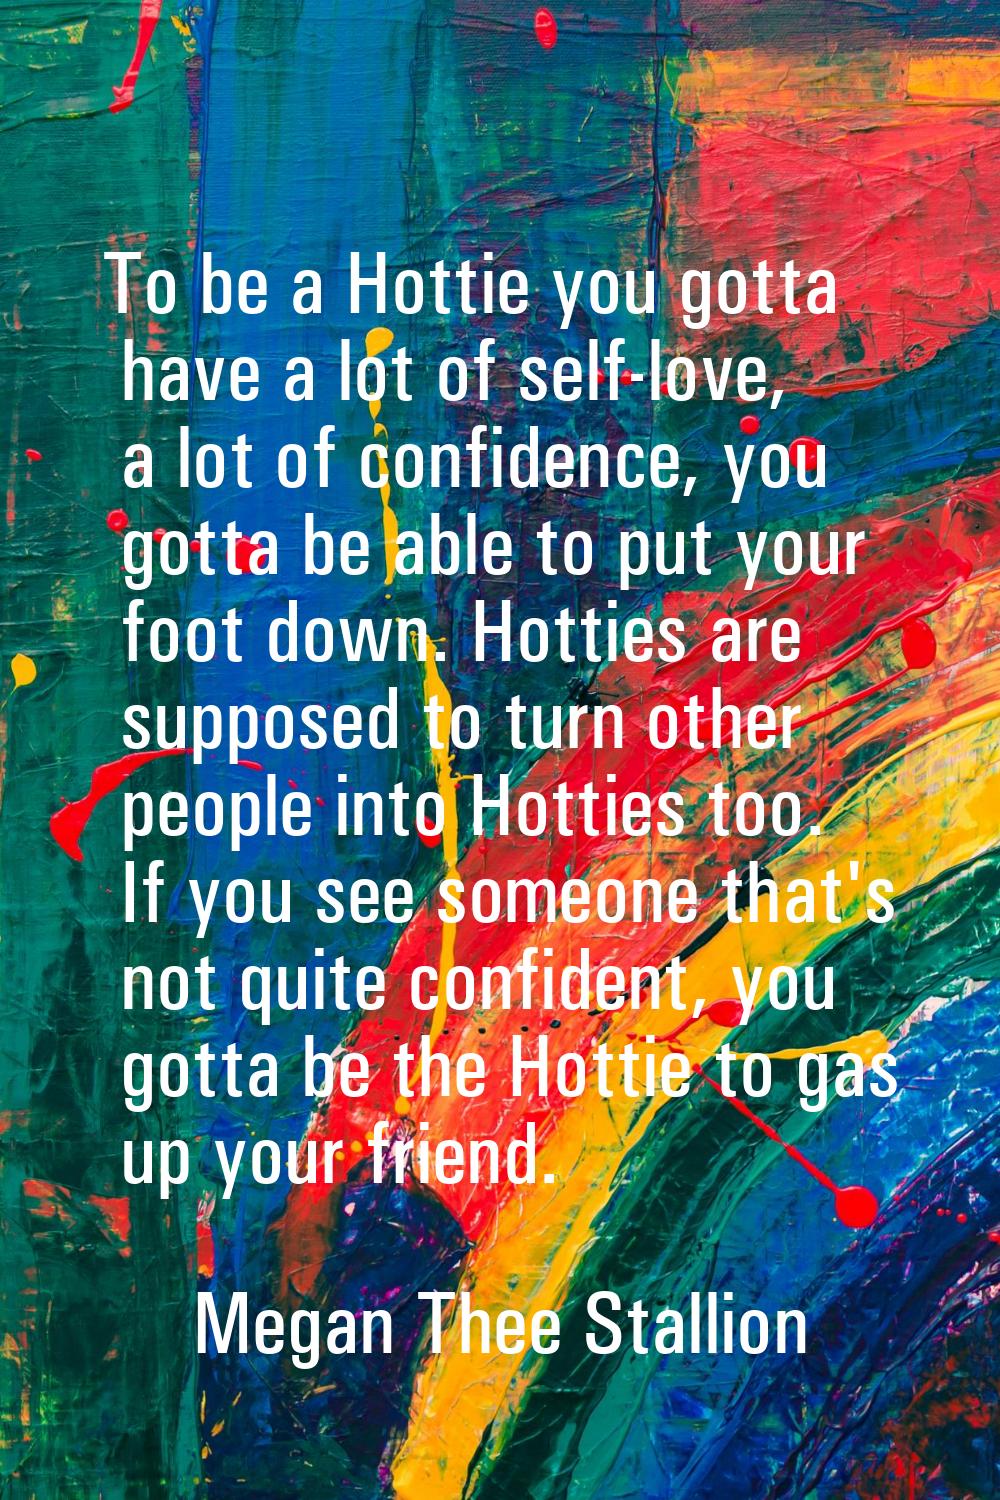 To be a Hottie you gotta have a lot of self-love, a lot of confidence, you gotta be able to put you